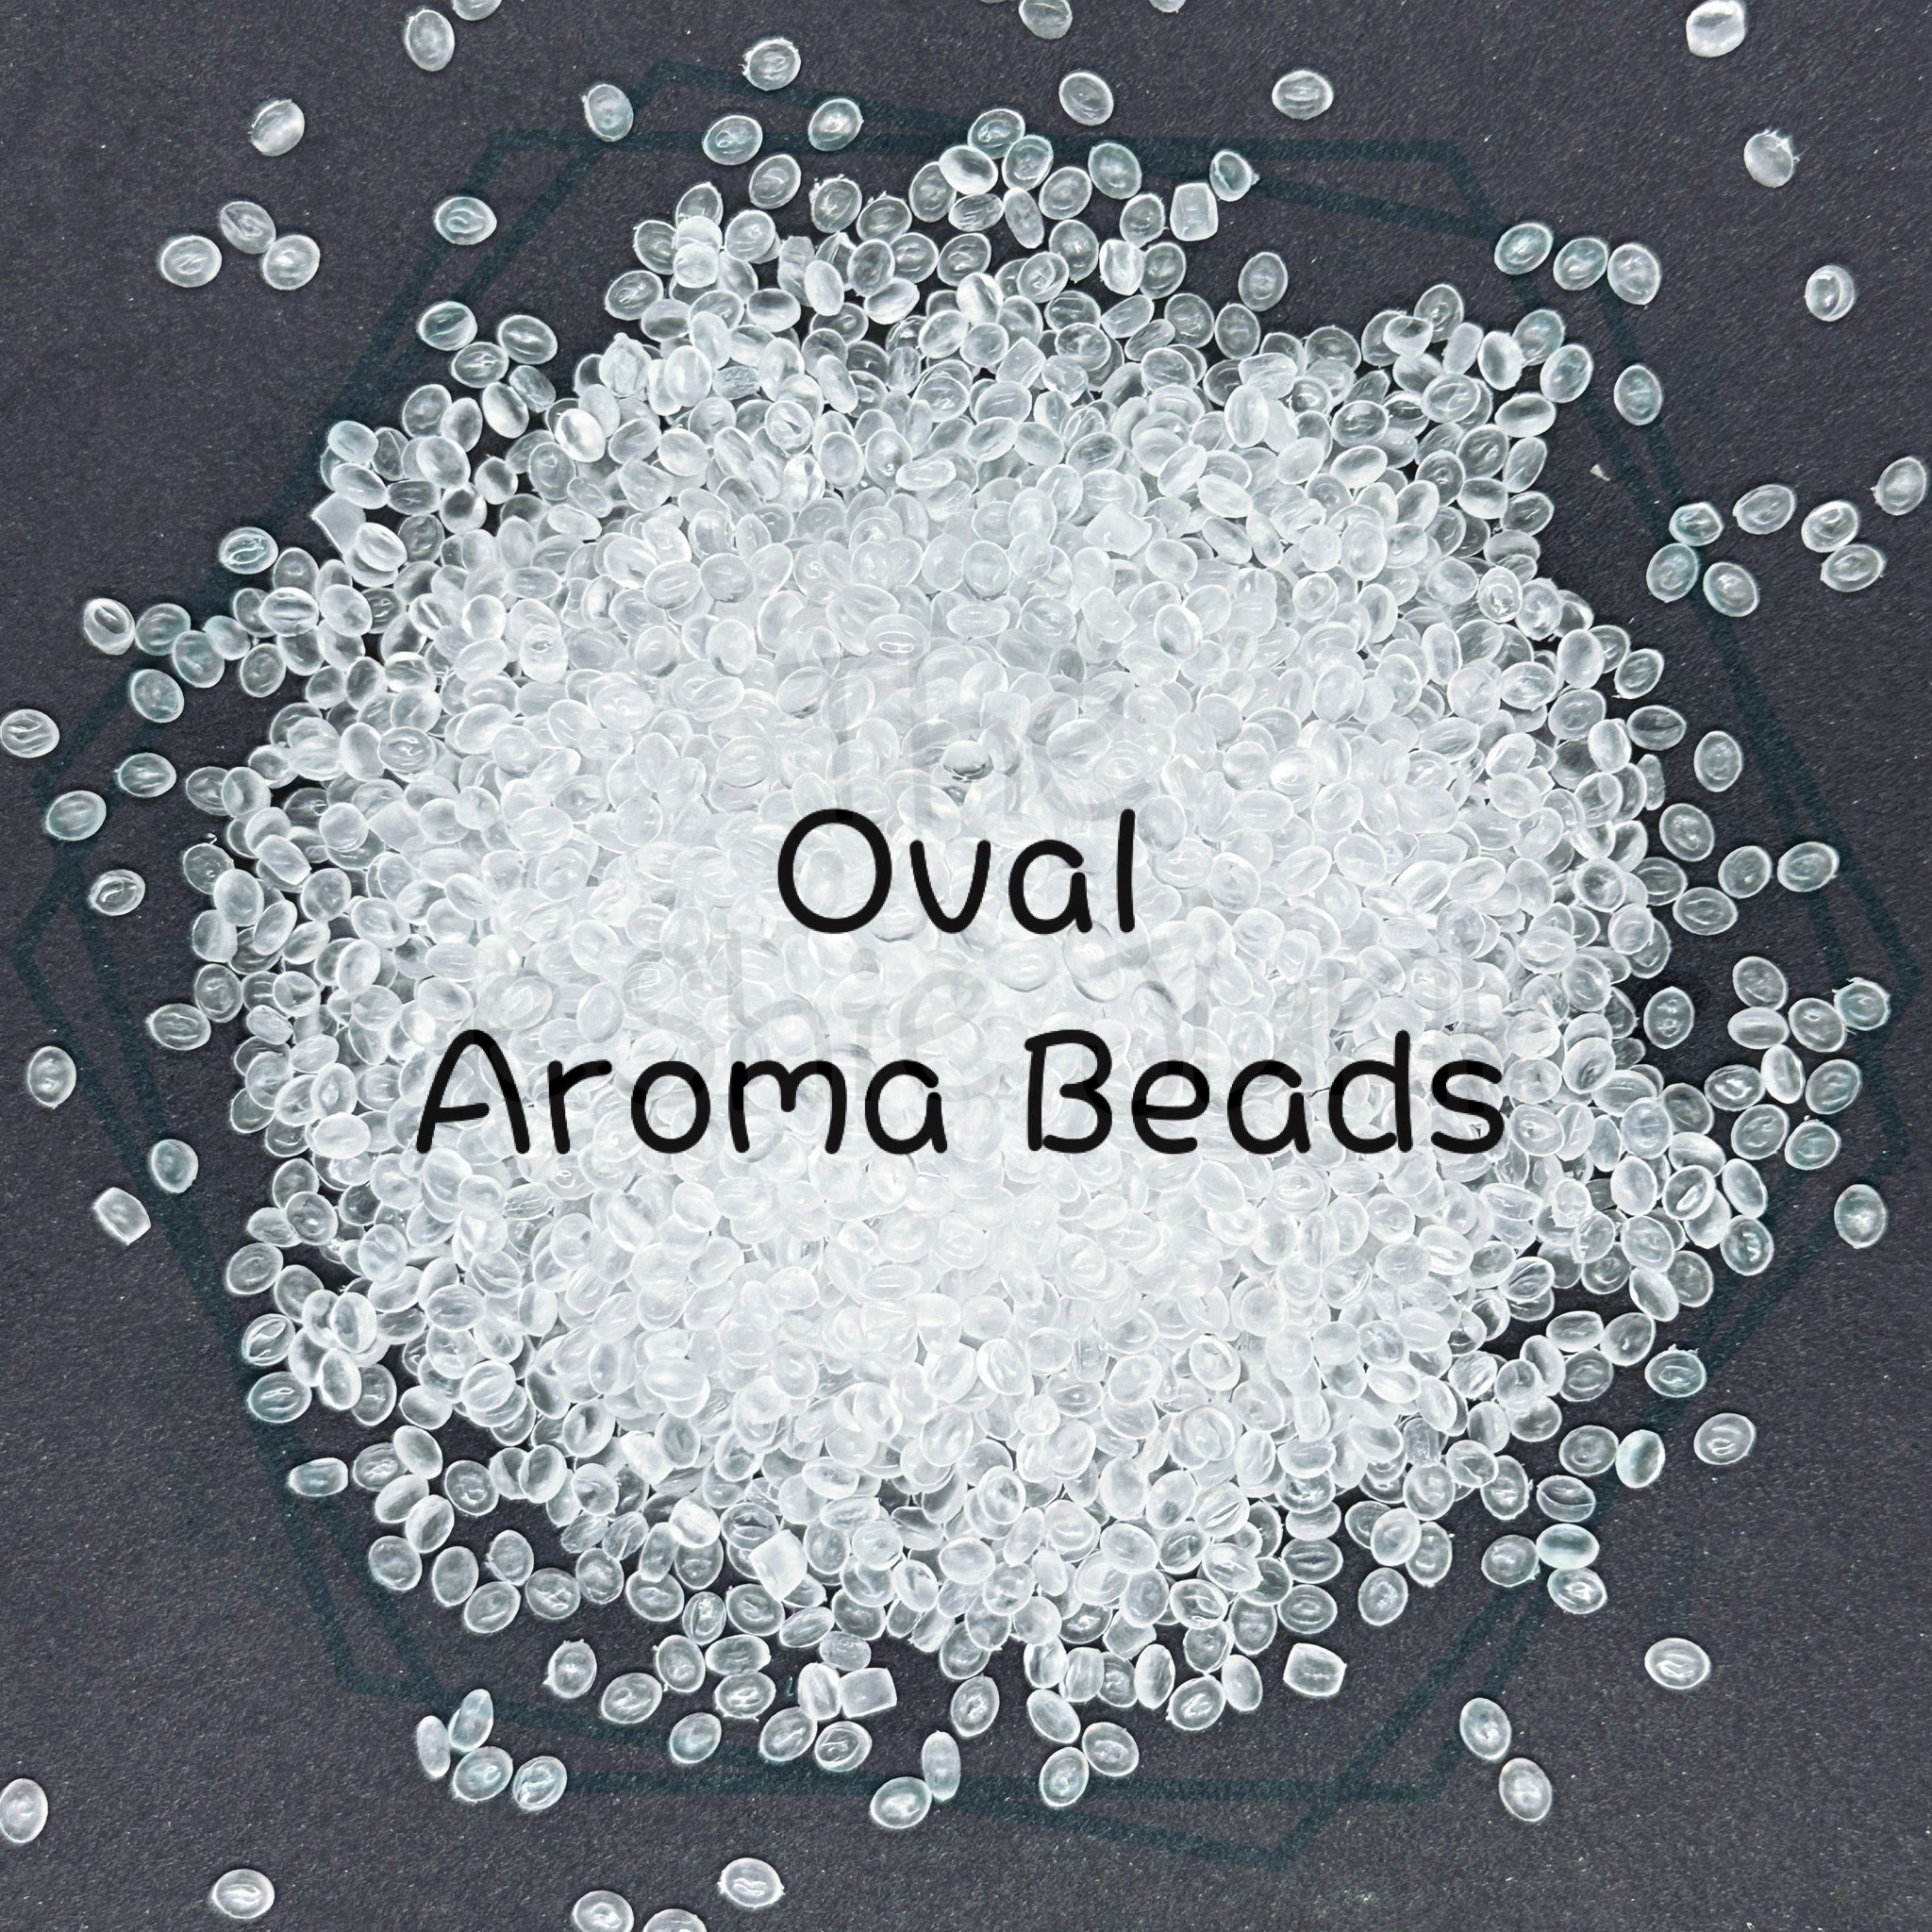 55 lb. Premium Unscented Aroma Beads cylindrical shape – Aroma